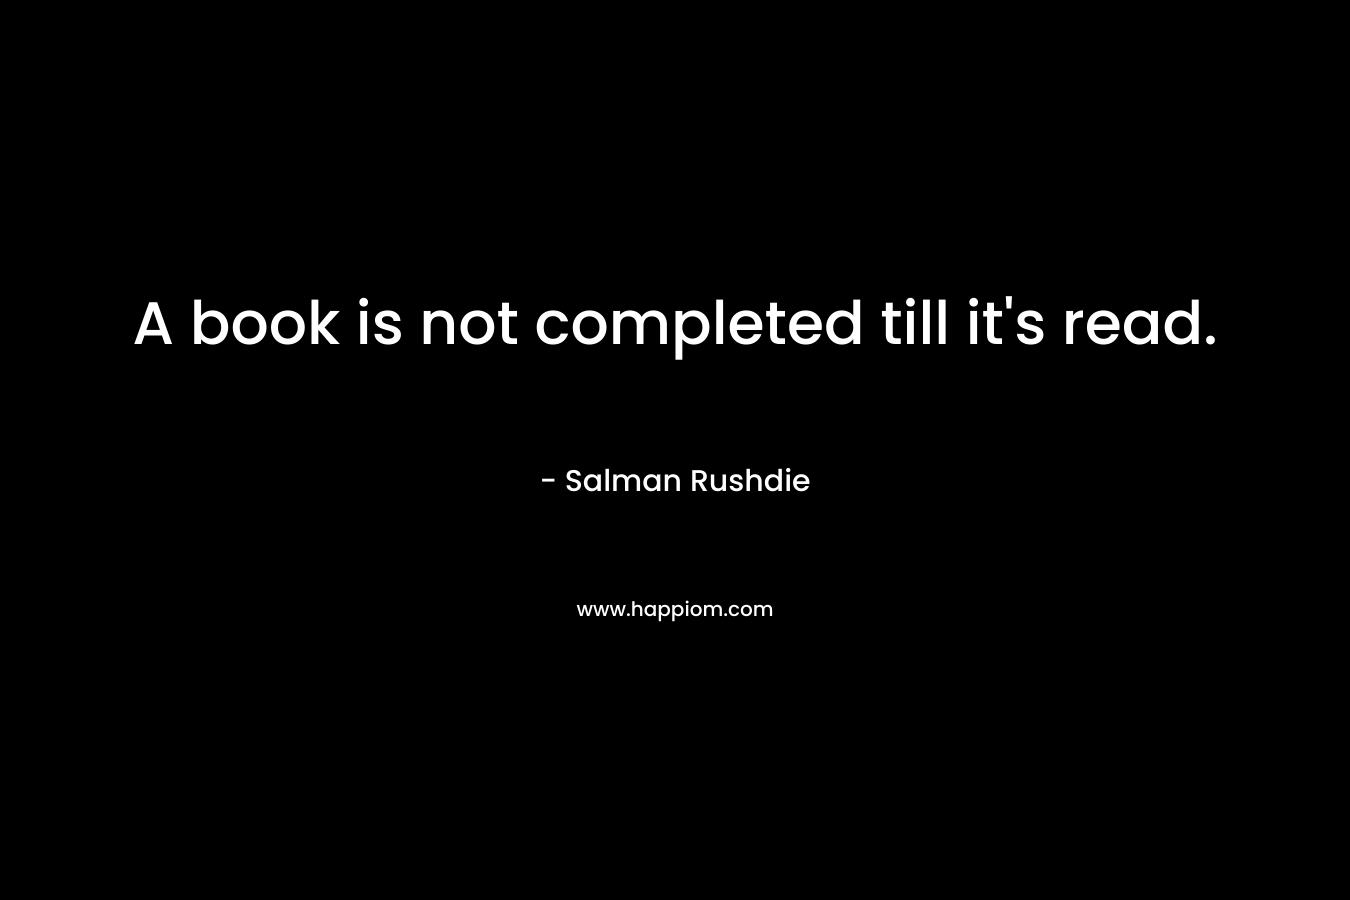 A book is not completed till it’s read. – Salman Rushdie